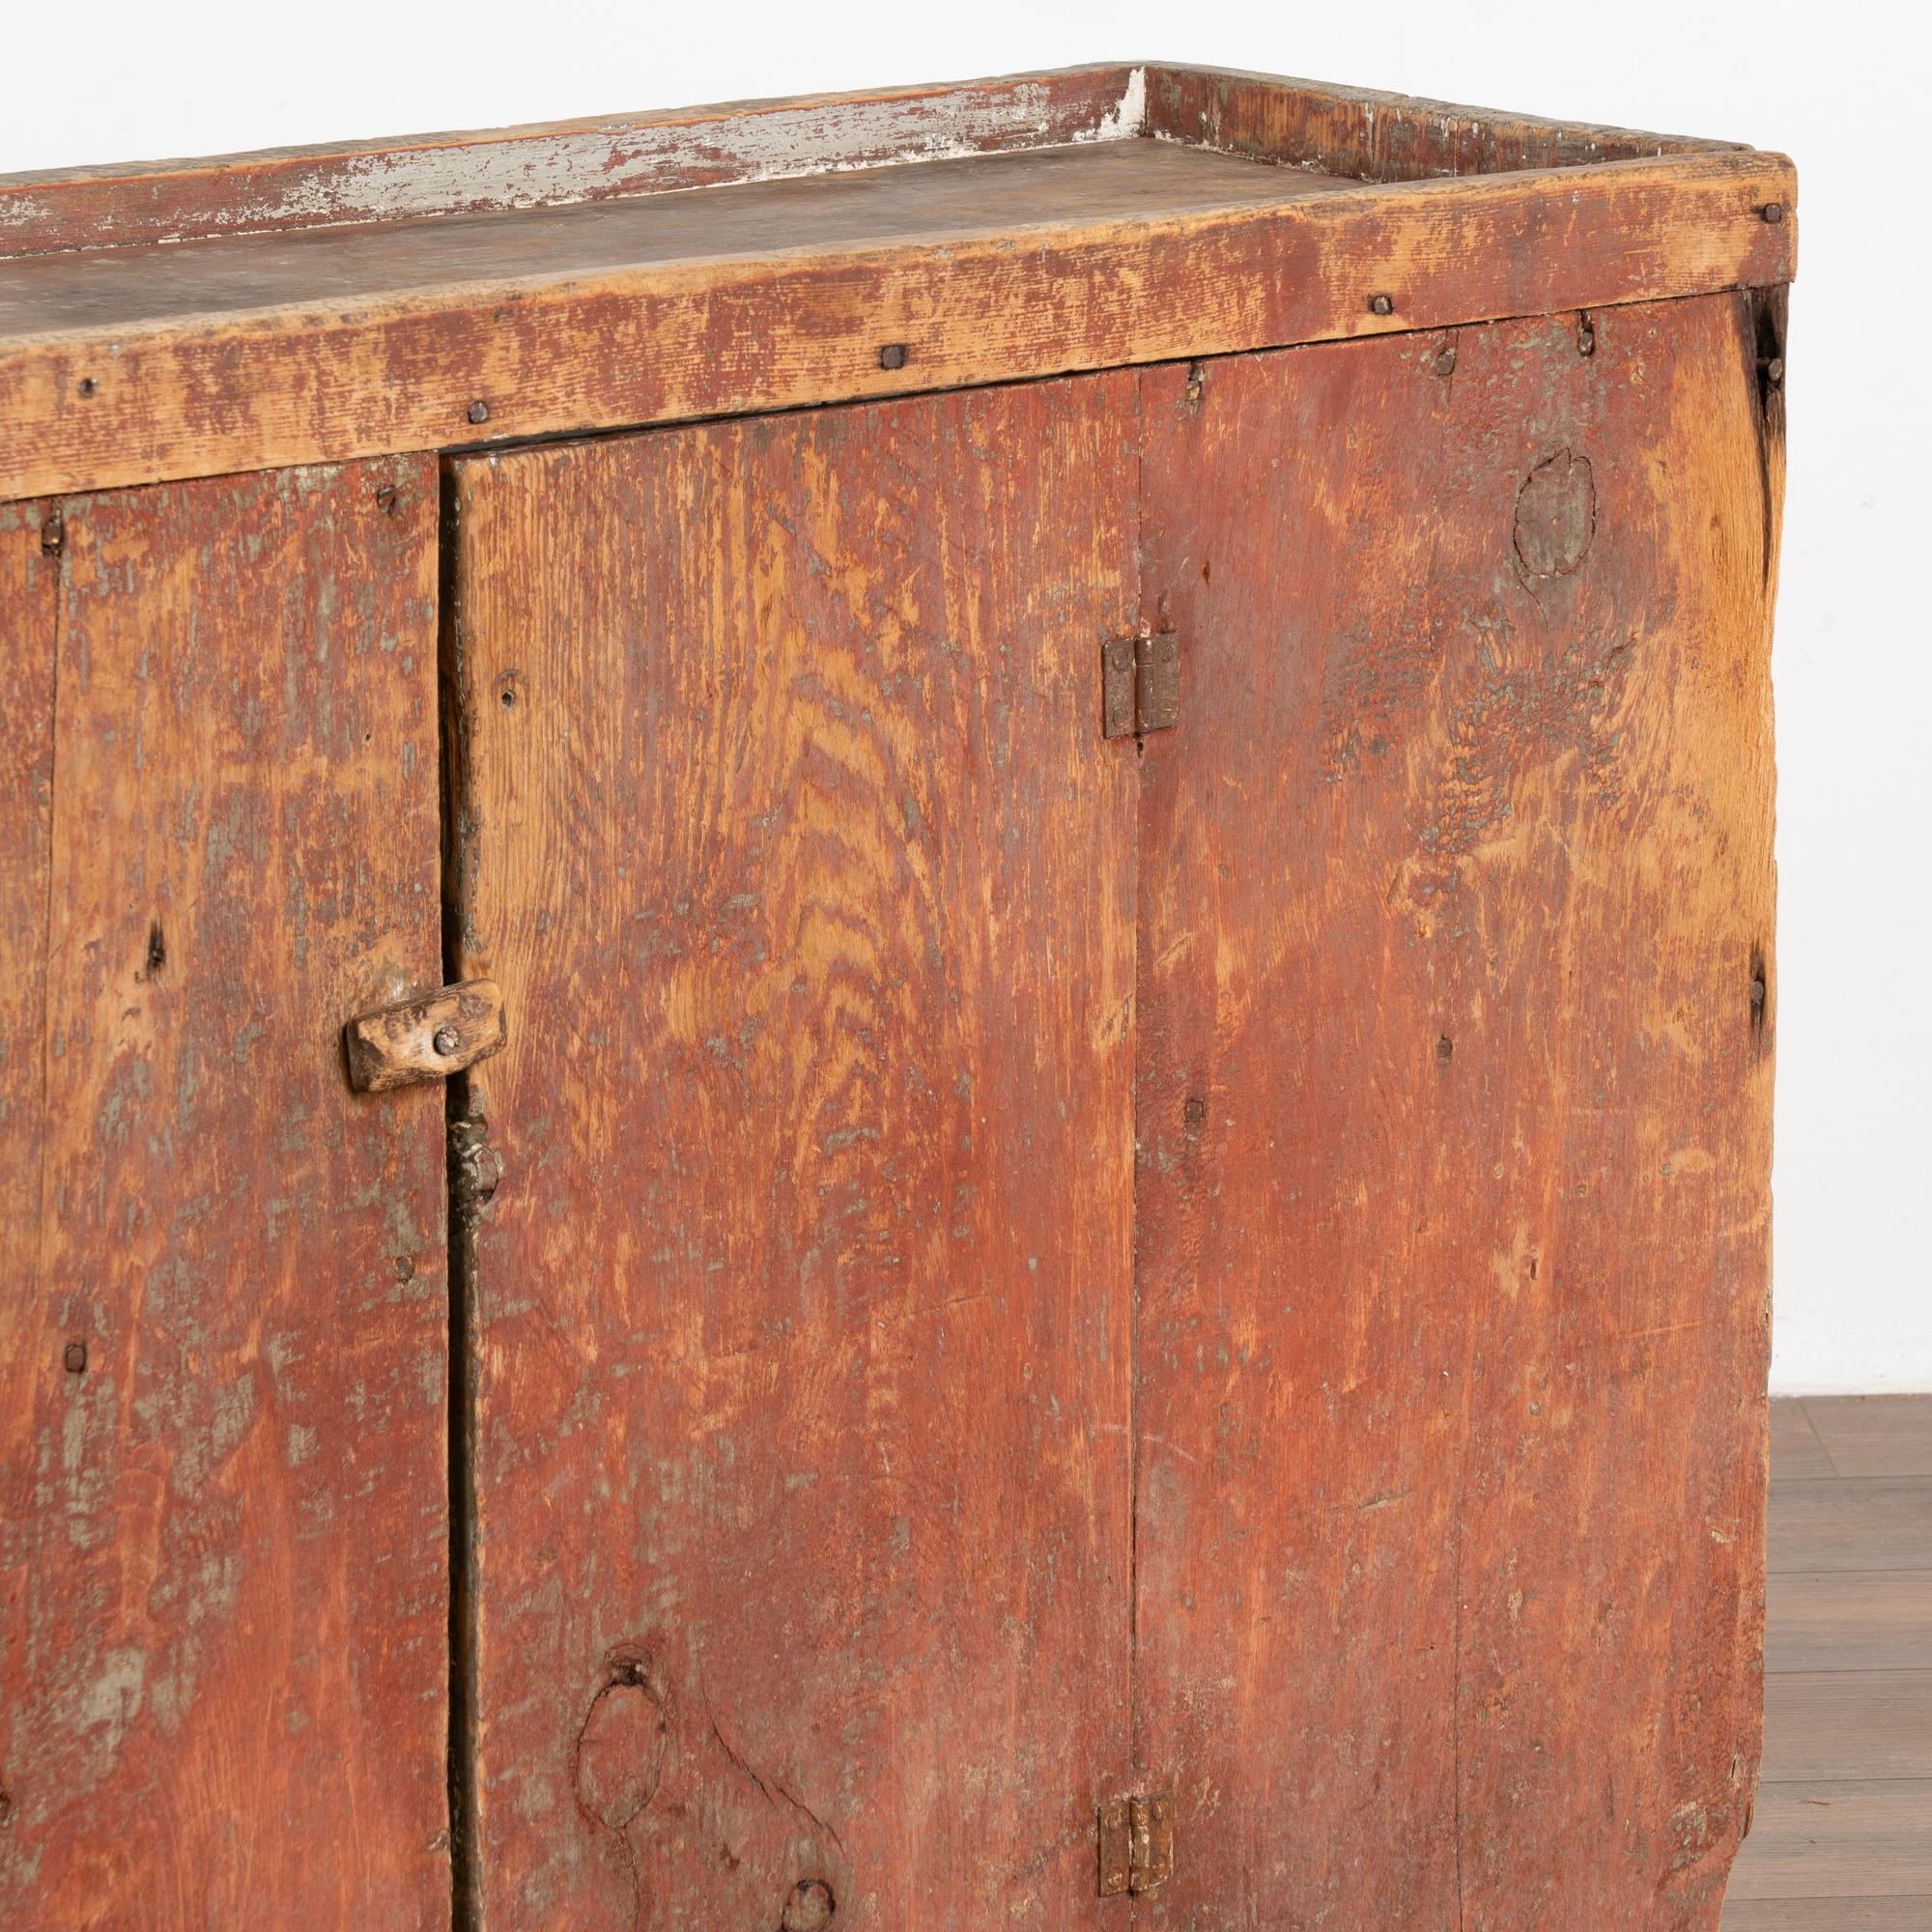 Original Red Painted Rustic Narrow Pine Cabinet, Sweden circa 1840-60 For Sale 2